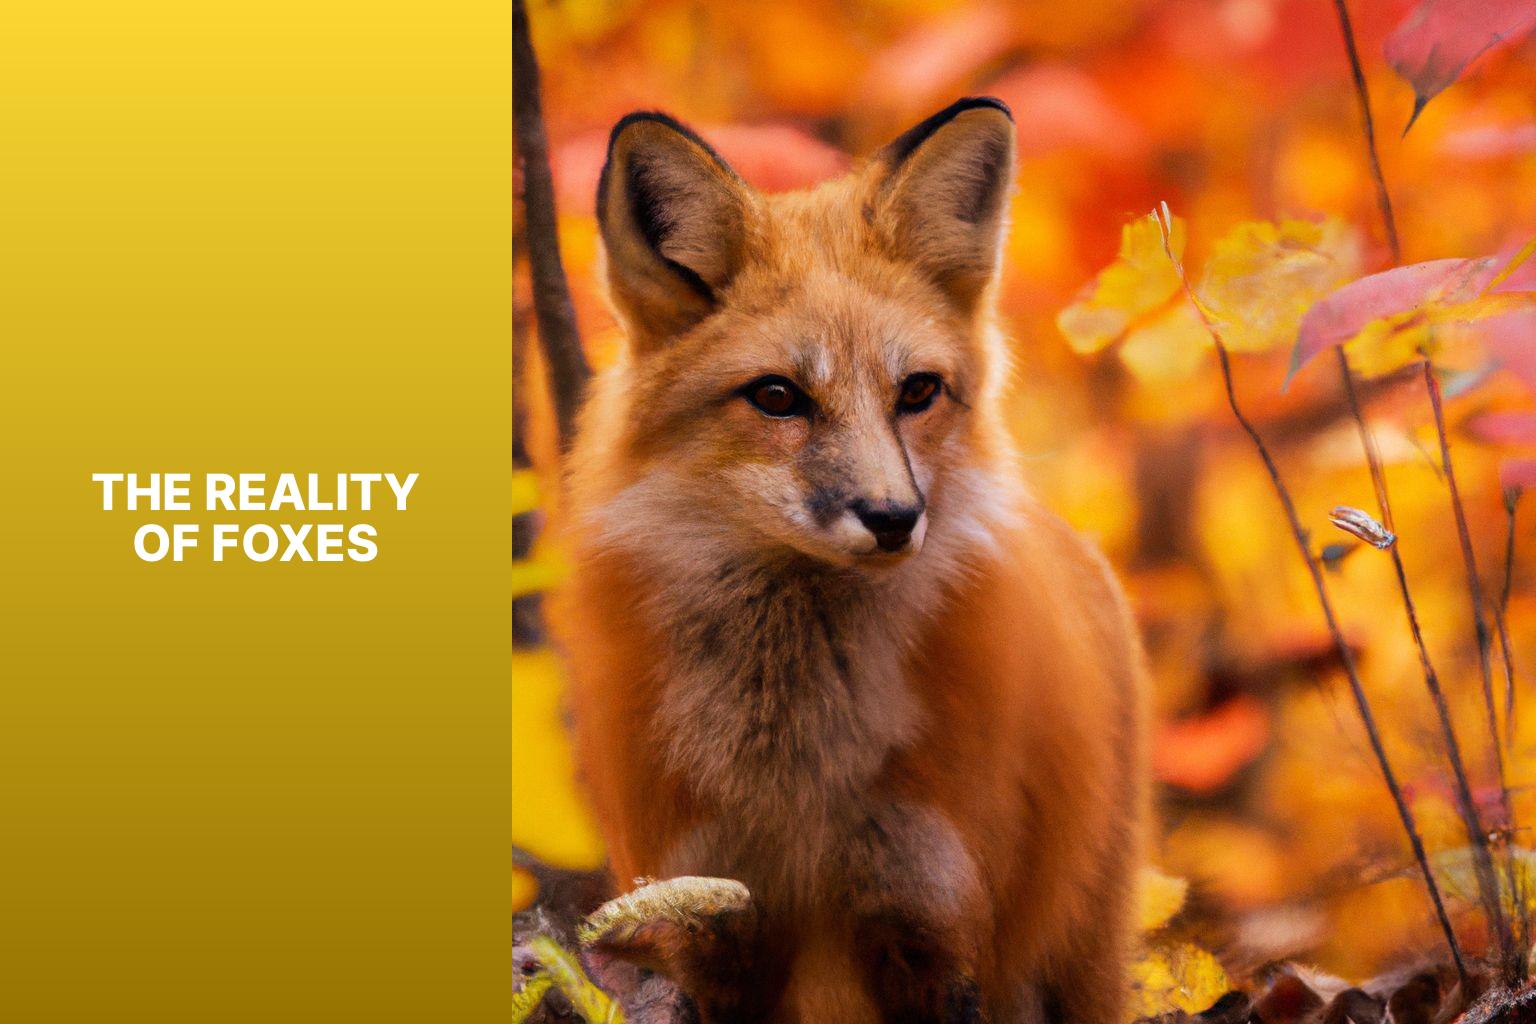 The Reality of Foxes - Fox Myths in Humanism 